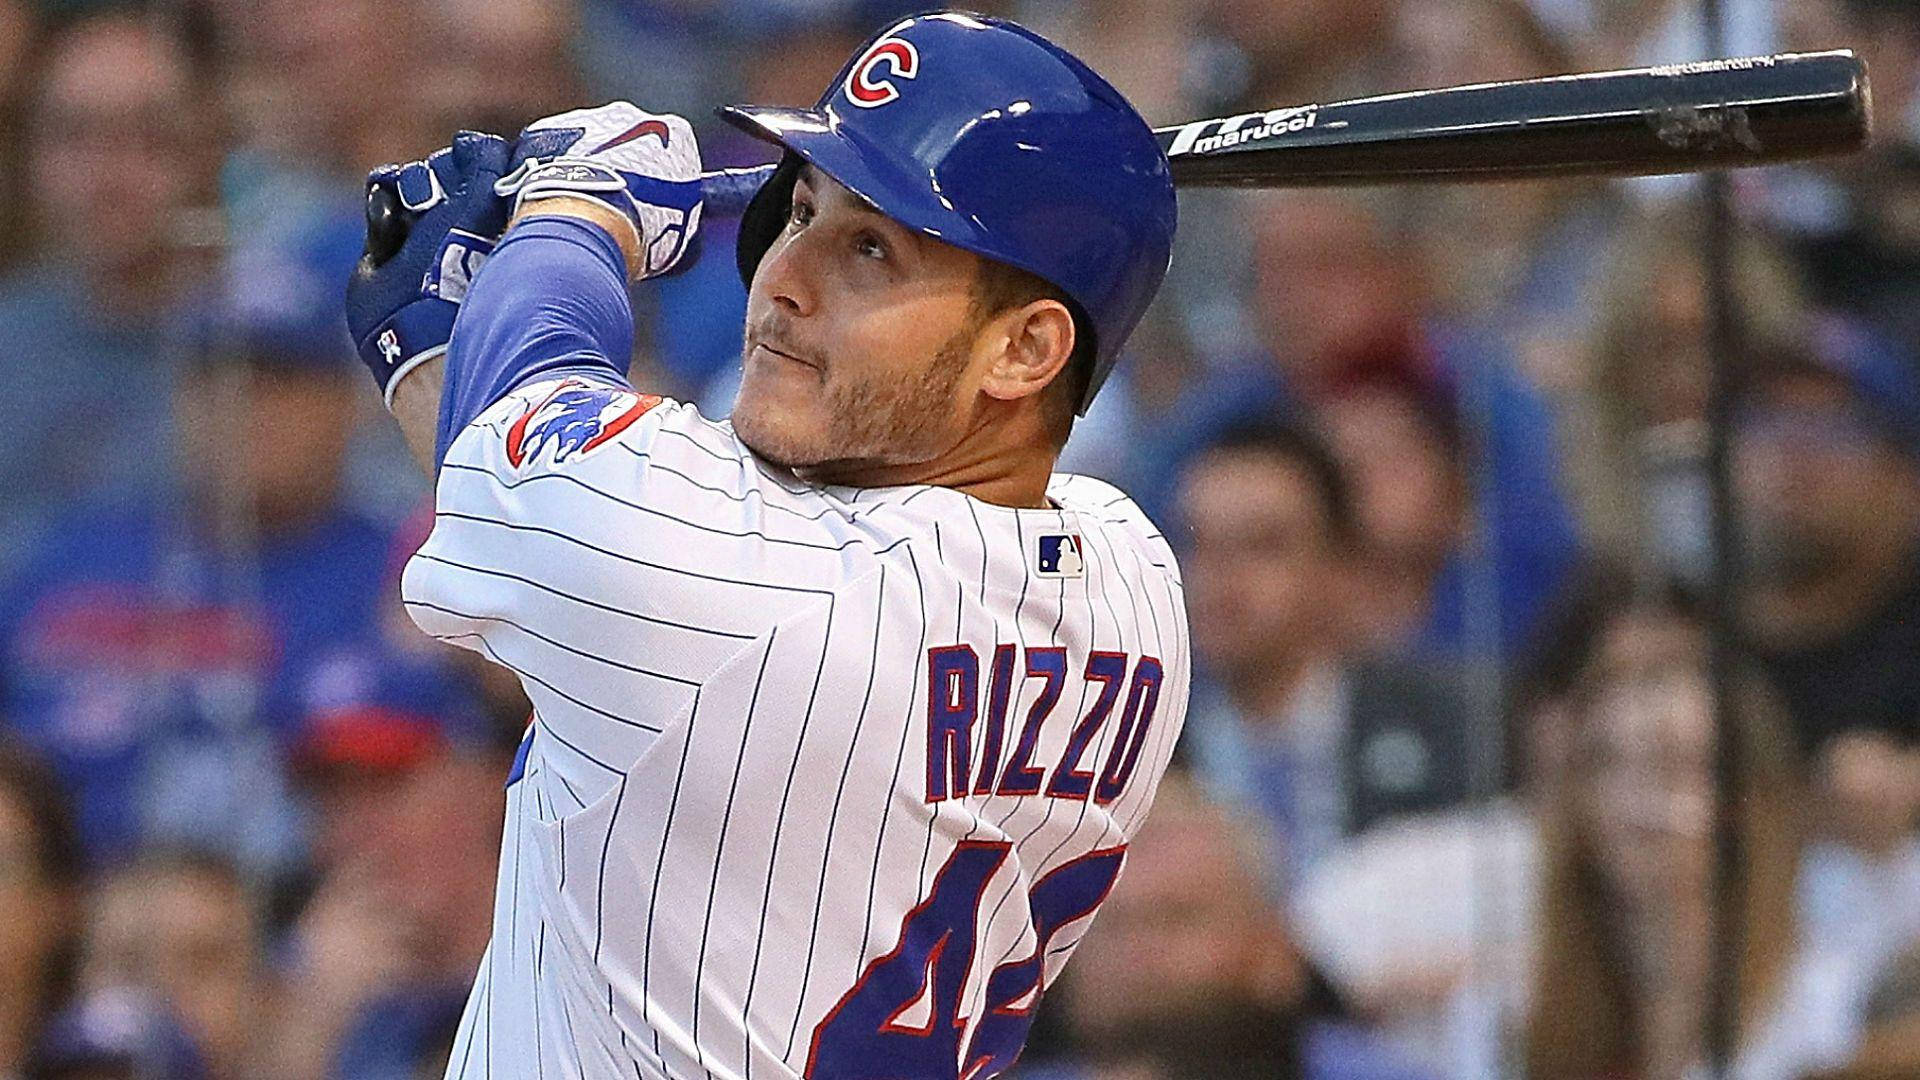 100+] Anthony Rizzo Wallpapers